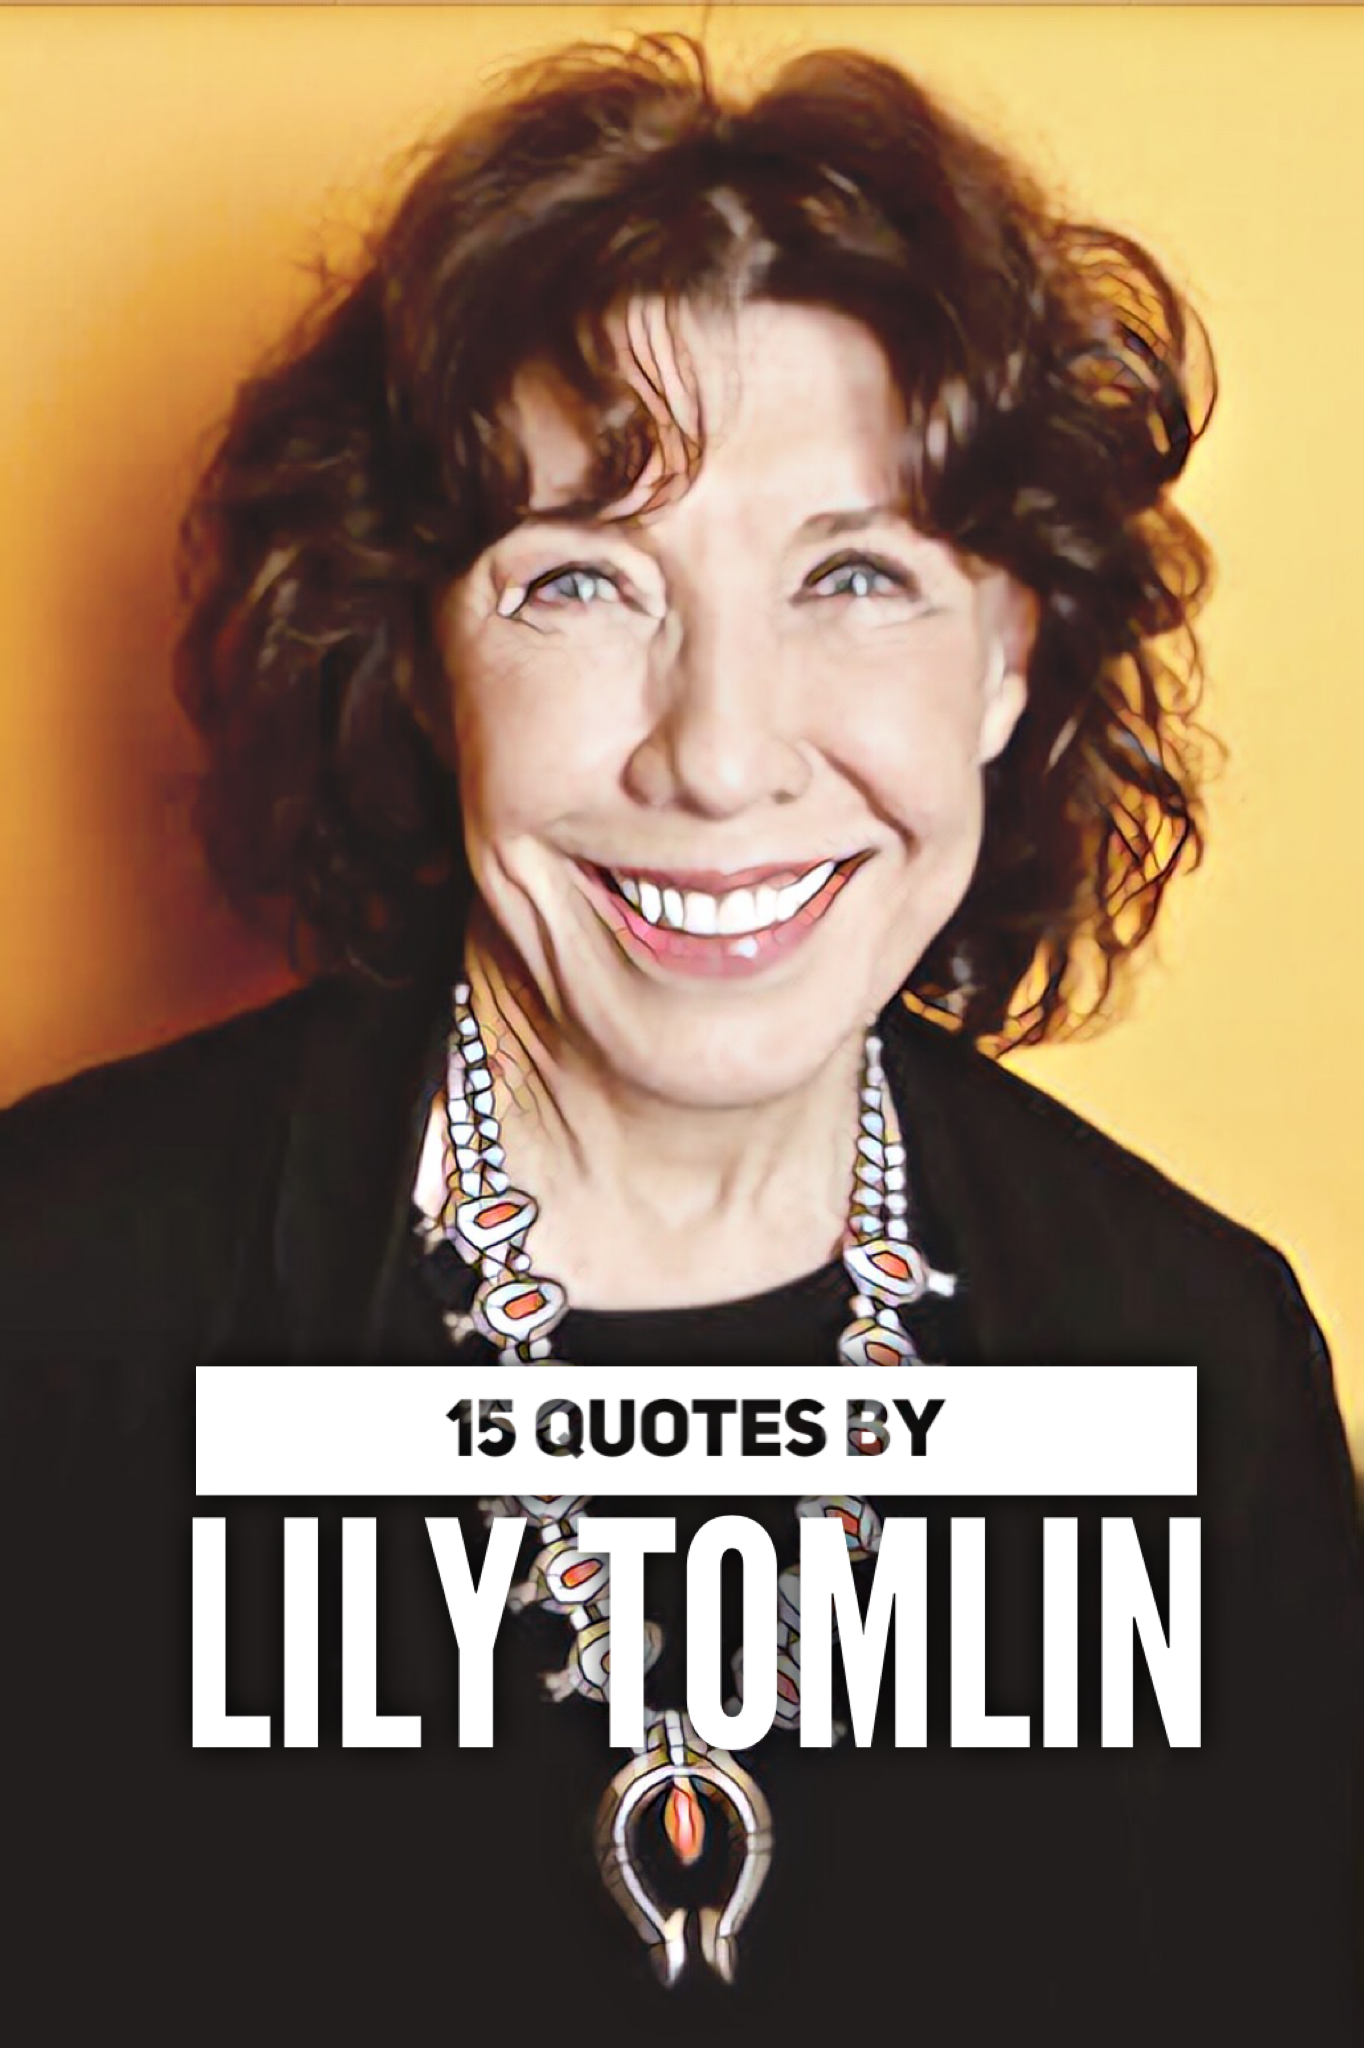 15 Quotes by Lily Tomlin - Roy Sutton